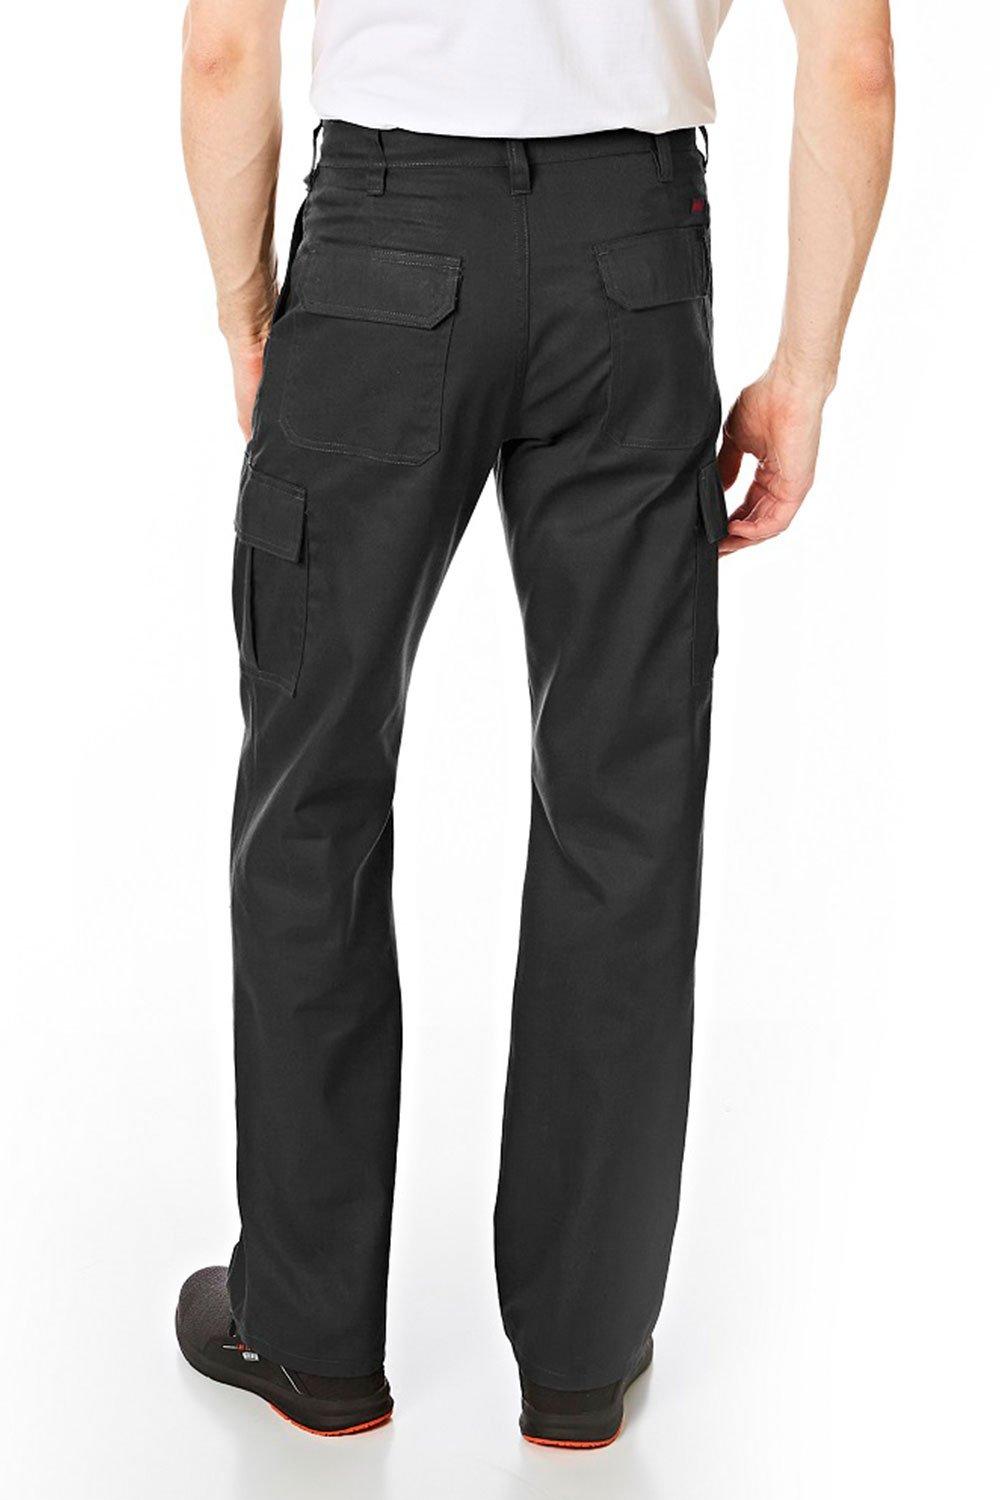 Lee Cooper Workwear Cargo Trousers Mens | SportsDirect.com Lithuania